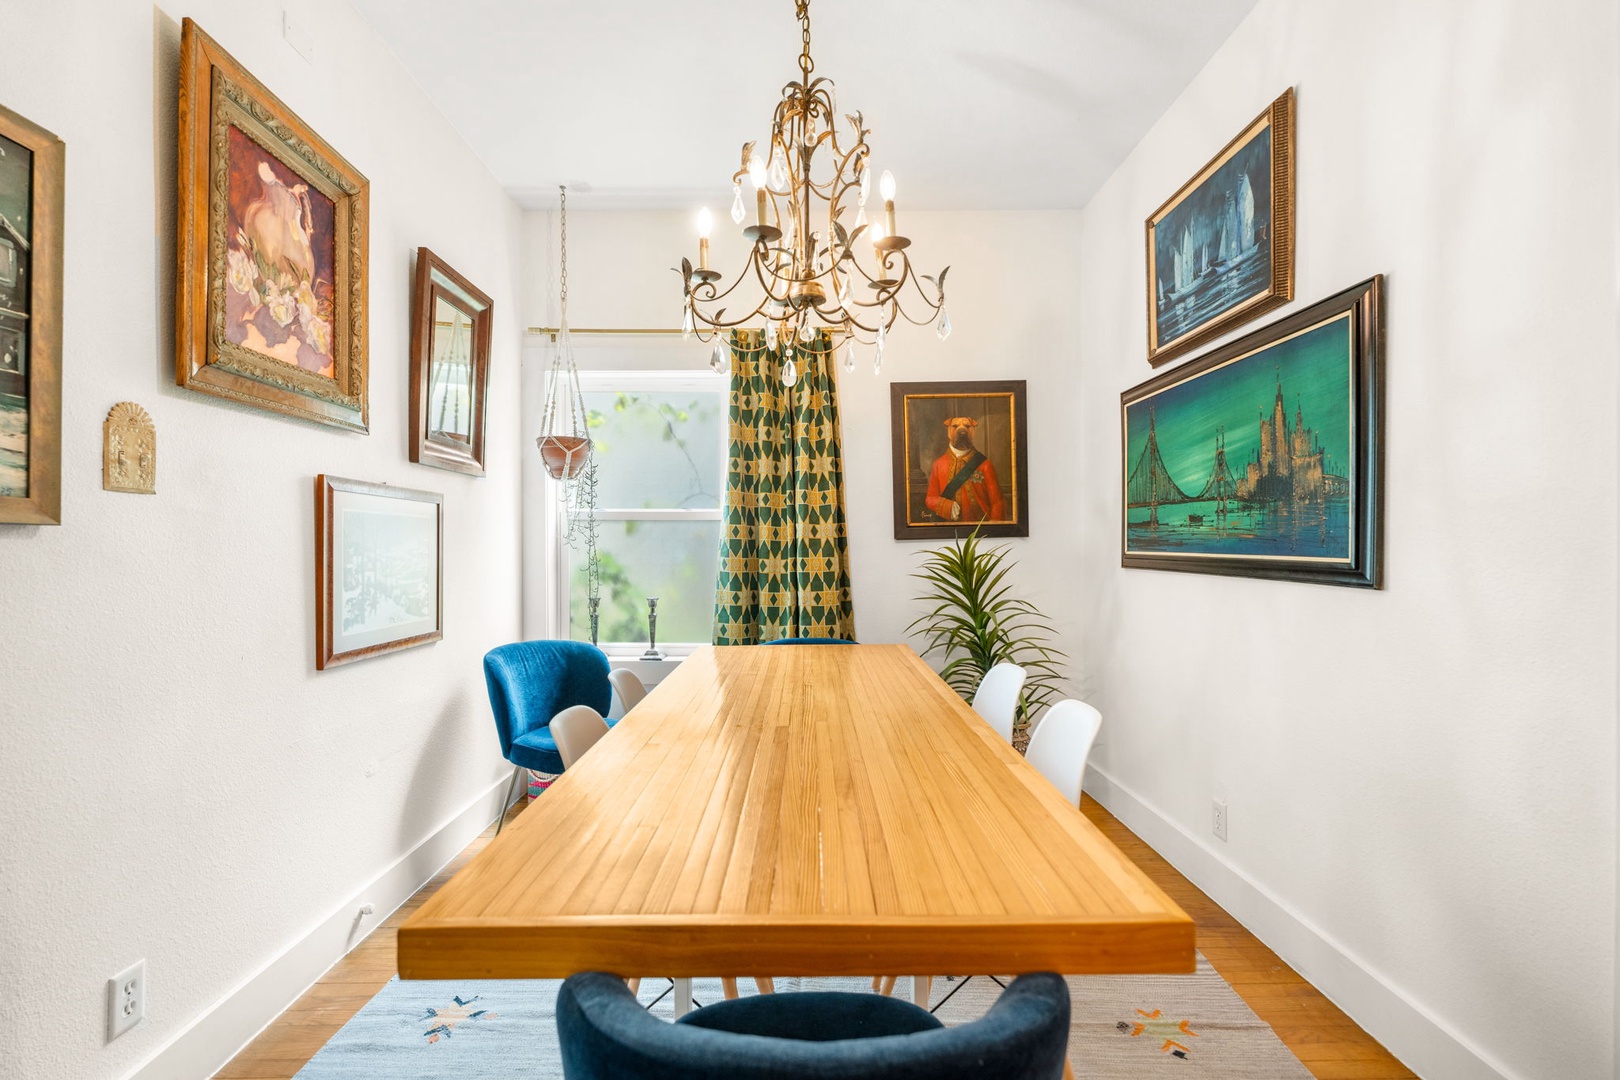 Gather for meals at the dining table, offering seating for 6